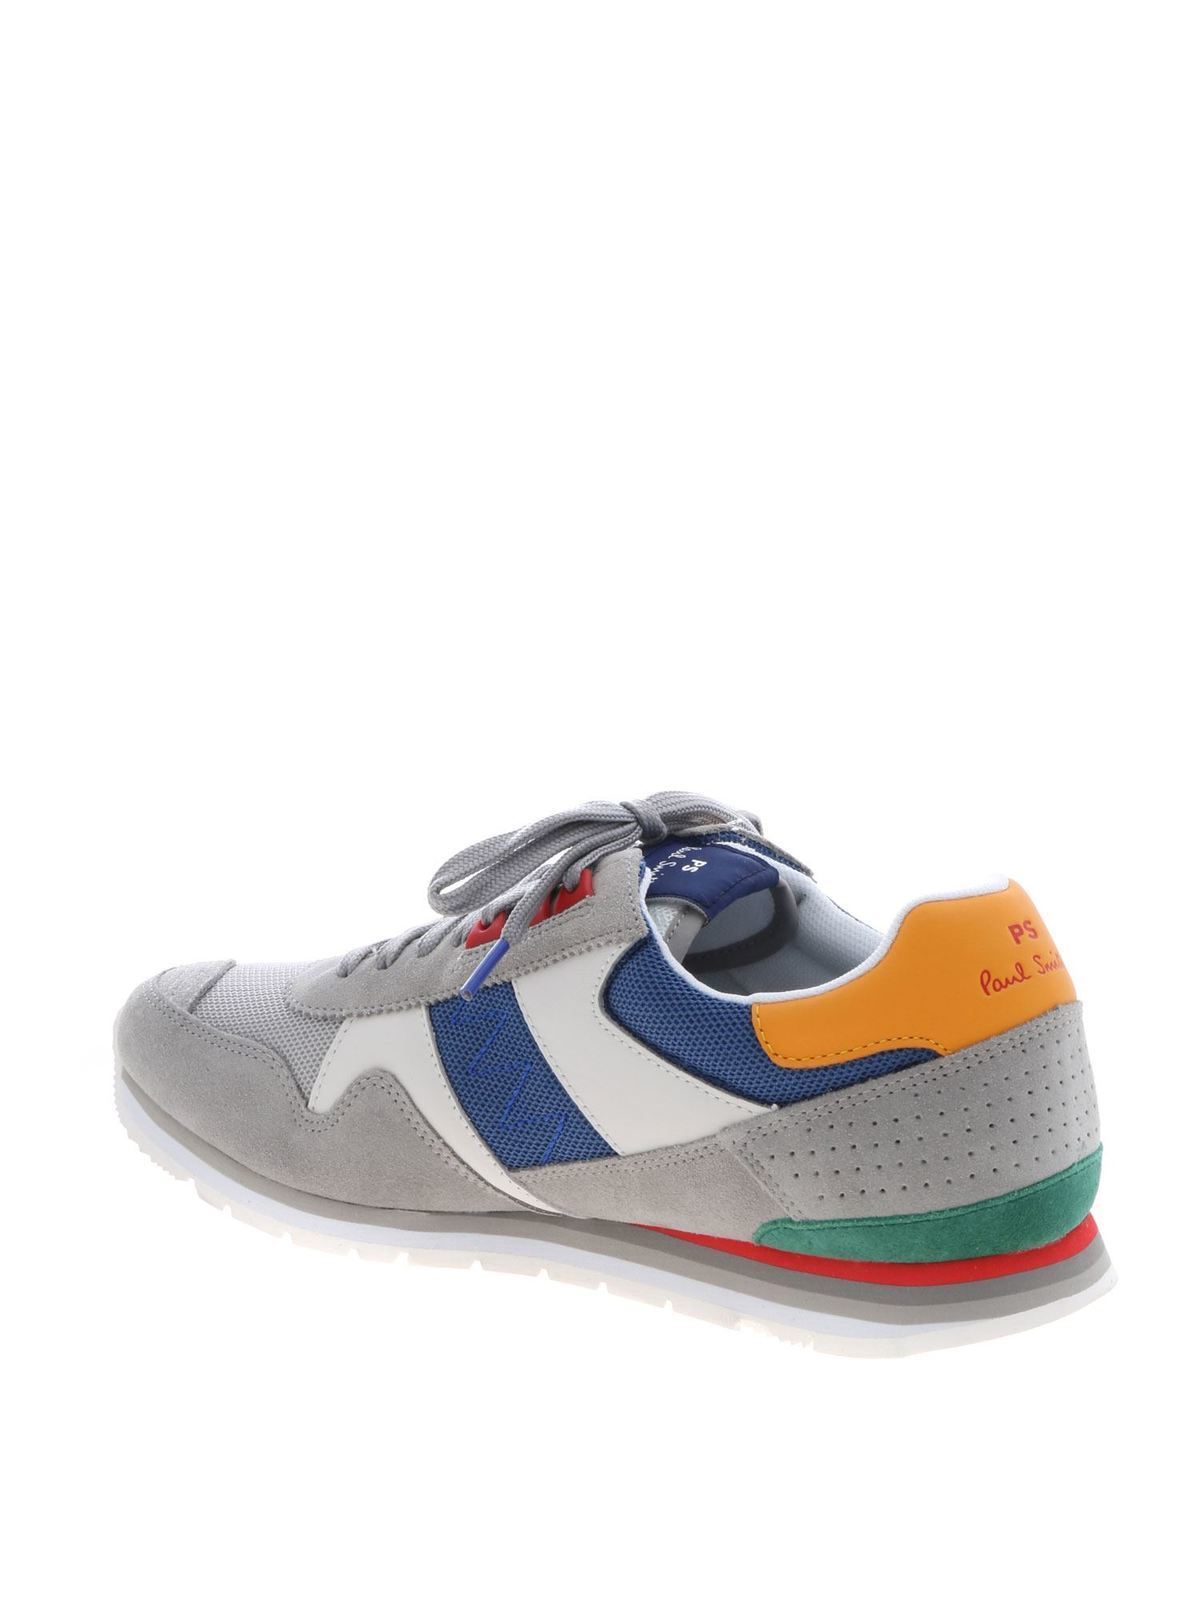 Arbitrage opslag Handschrift Trainers Ps by Paul Smith - Vinny sneakers in grey suede - M2SVIN11AVES92